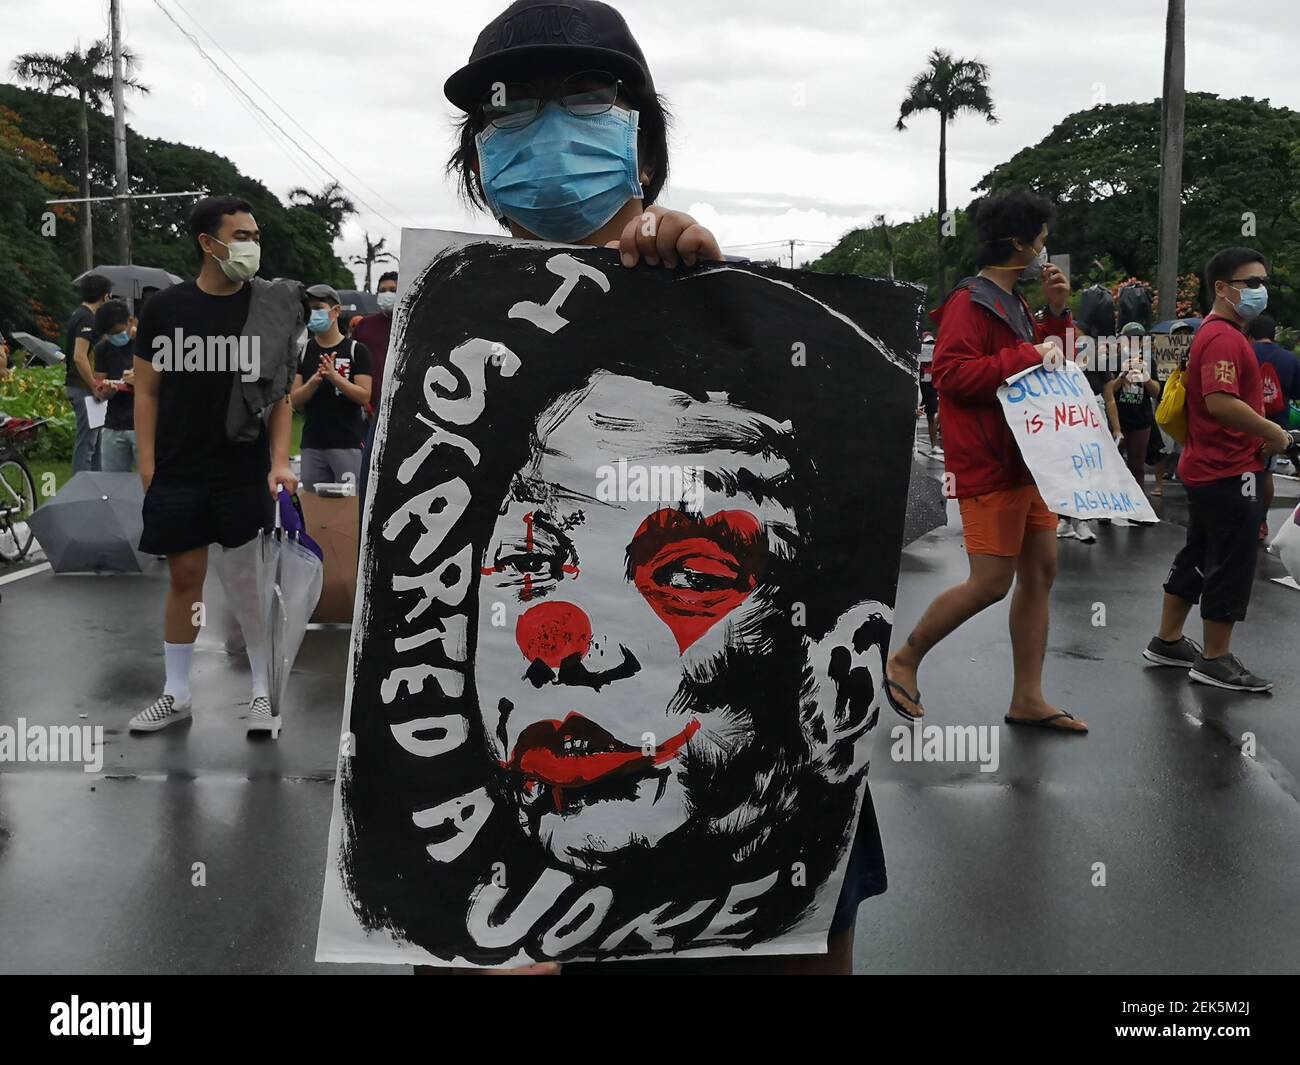 An Independence Day Protest Dubbed As Grand Mananita Was Held In Up Diliman Quezon City Philippines On June 12 Attended By Thousand Of Militant Groups And Students To Show Their Displeased